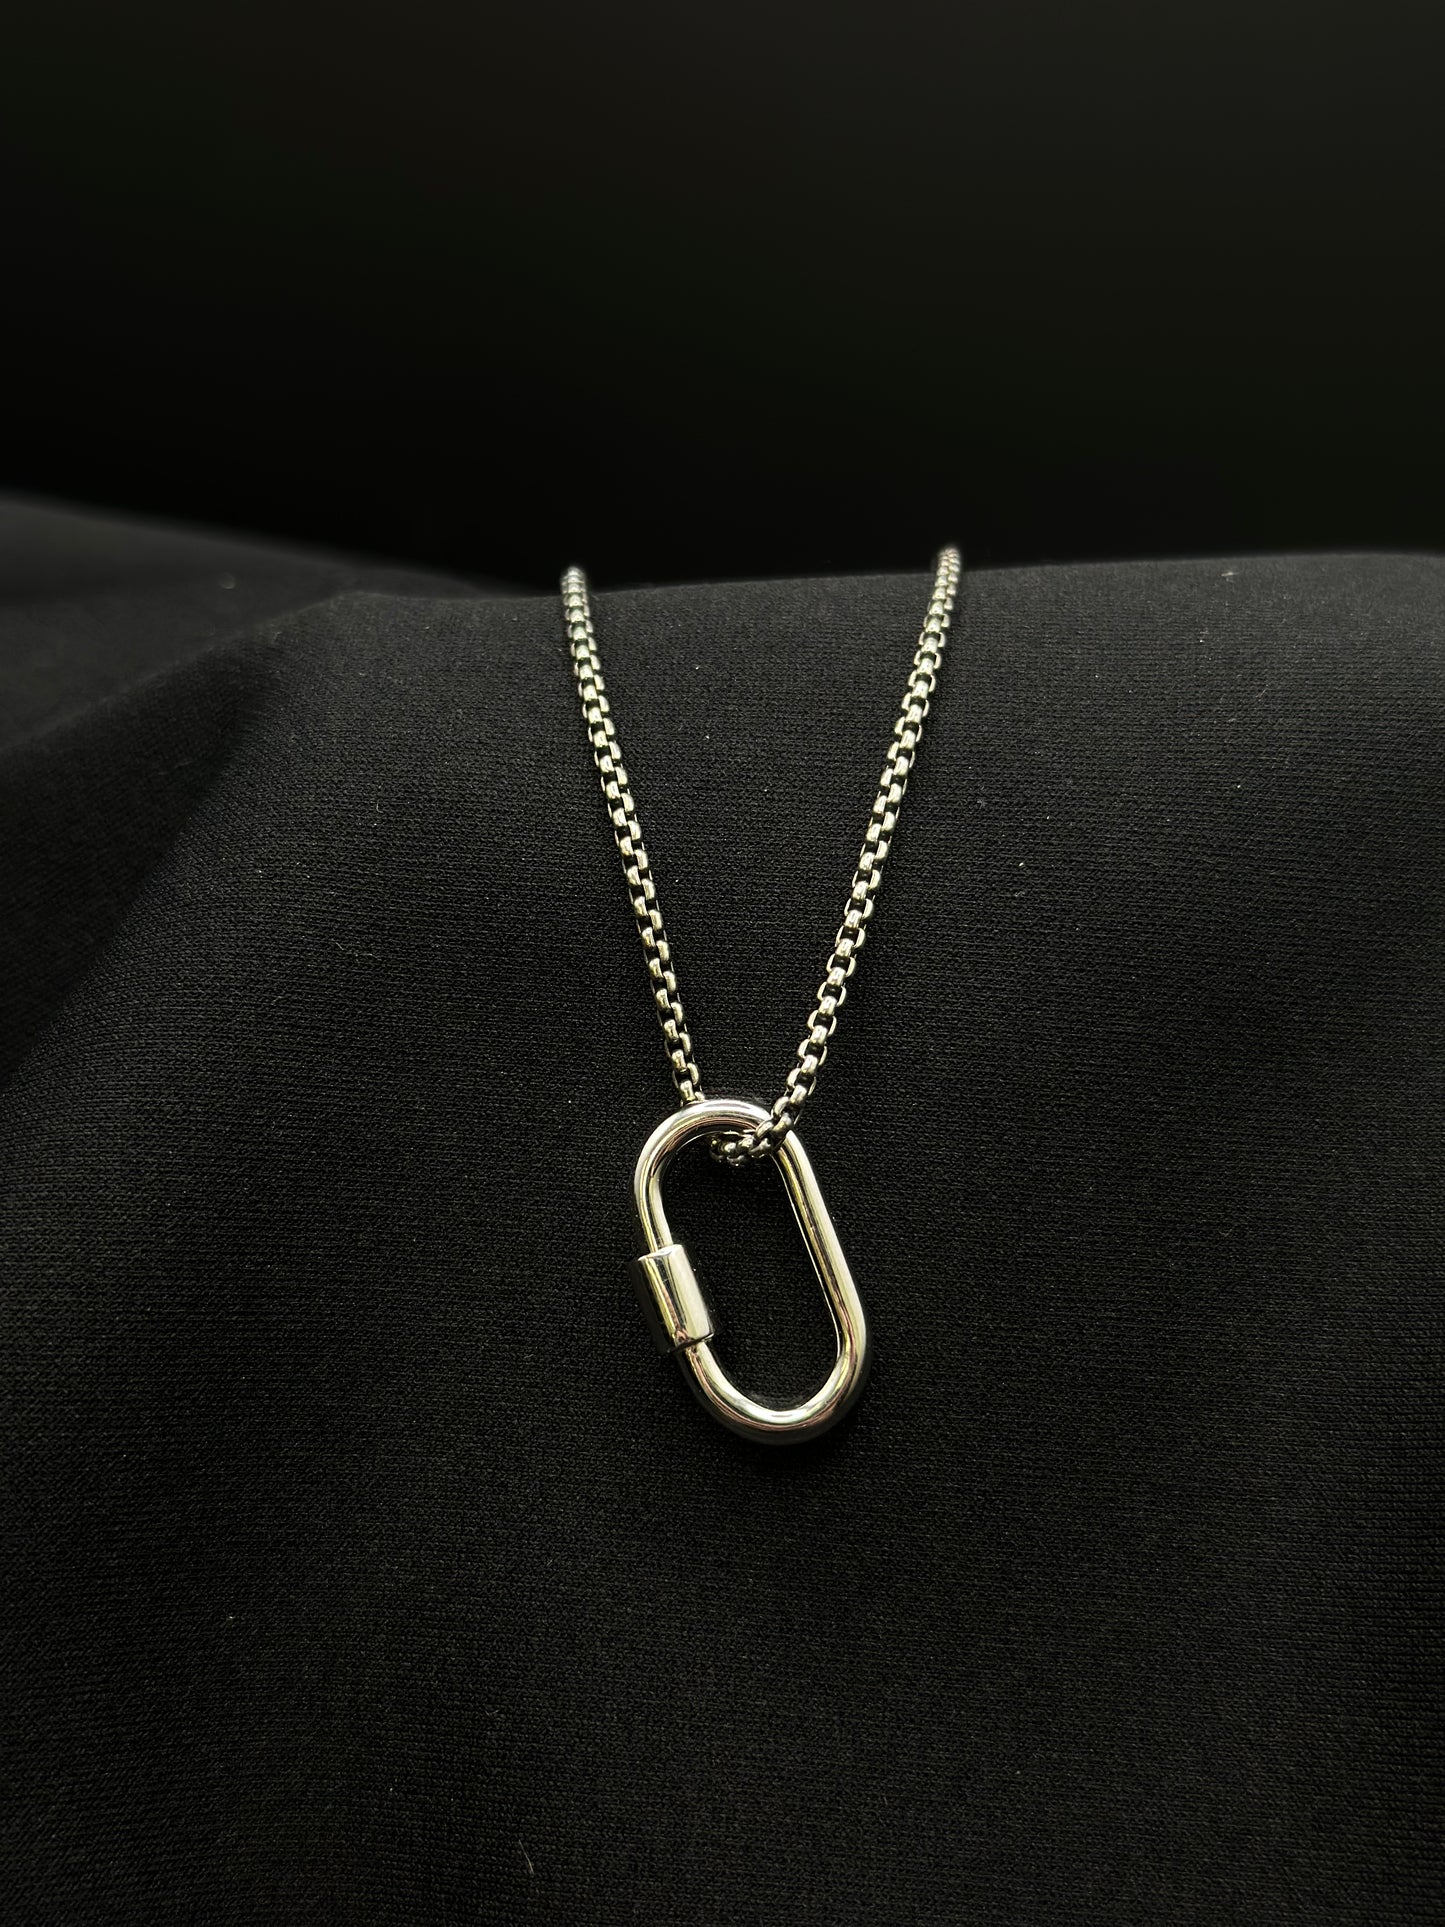 The Sterling Silver Lock Pendant